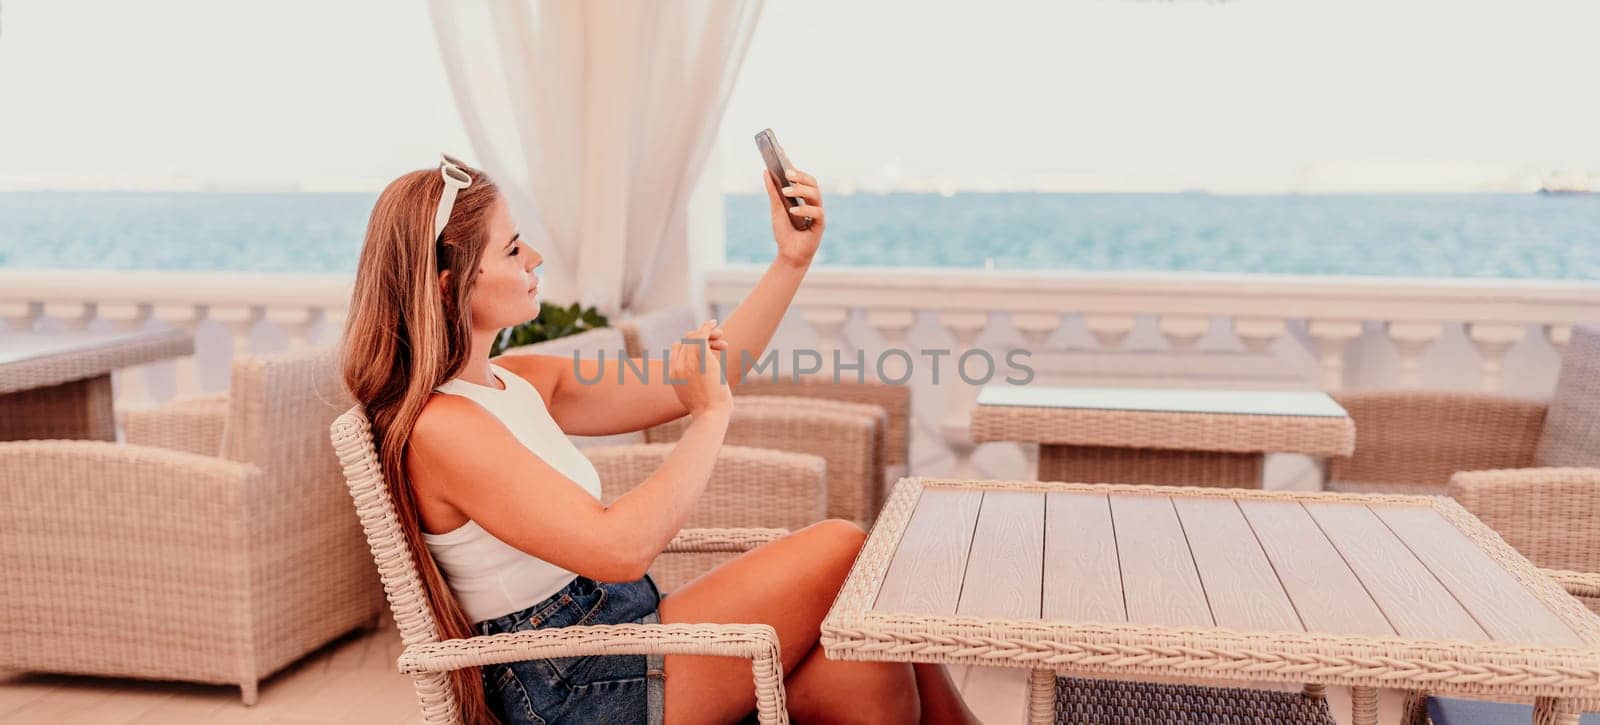 A woman is sitting at a table with a cell phone in her hand. She is taking a picture of the ocean